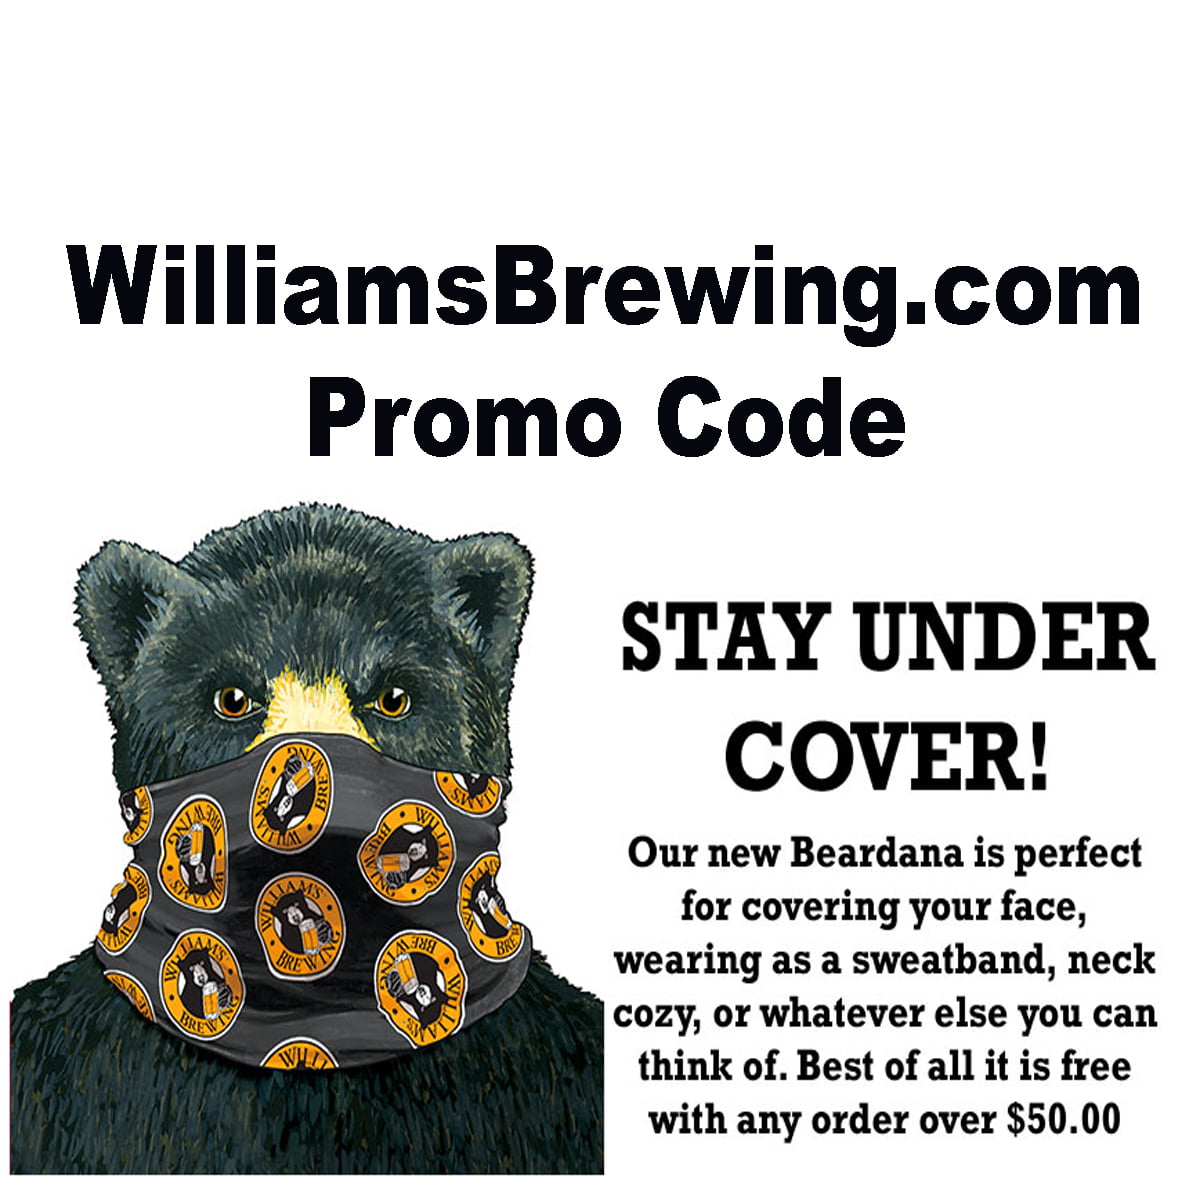 Get a FREE Beardana with the WilliamsBrewing.com Promo Code for August 2020